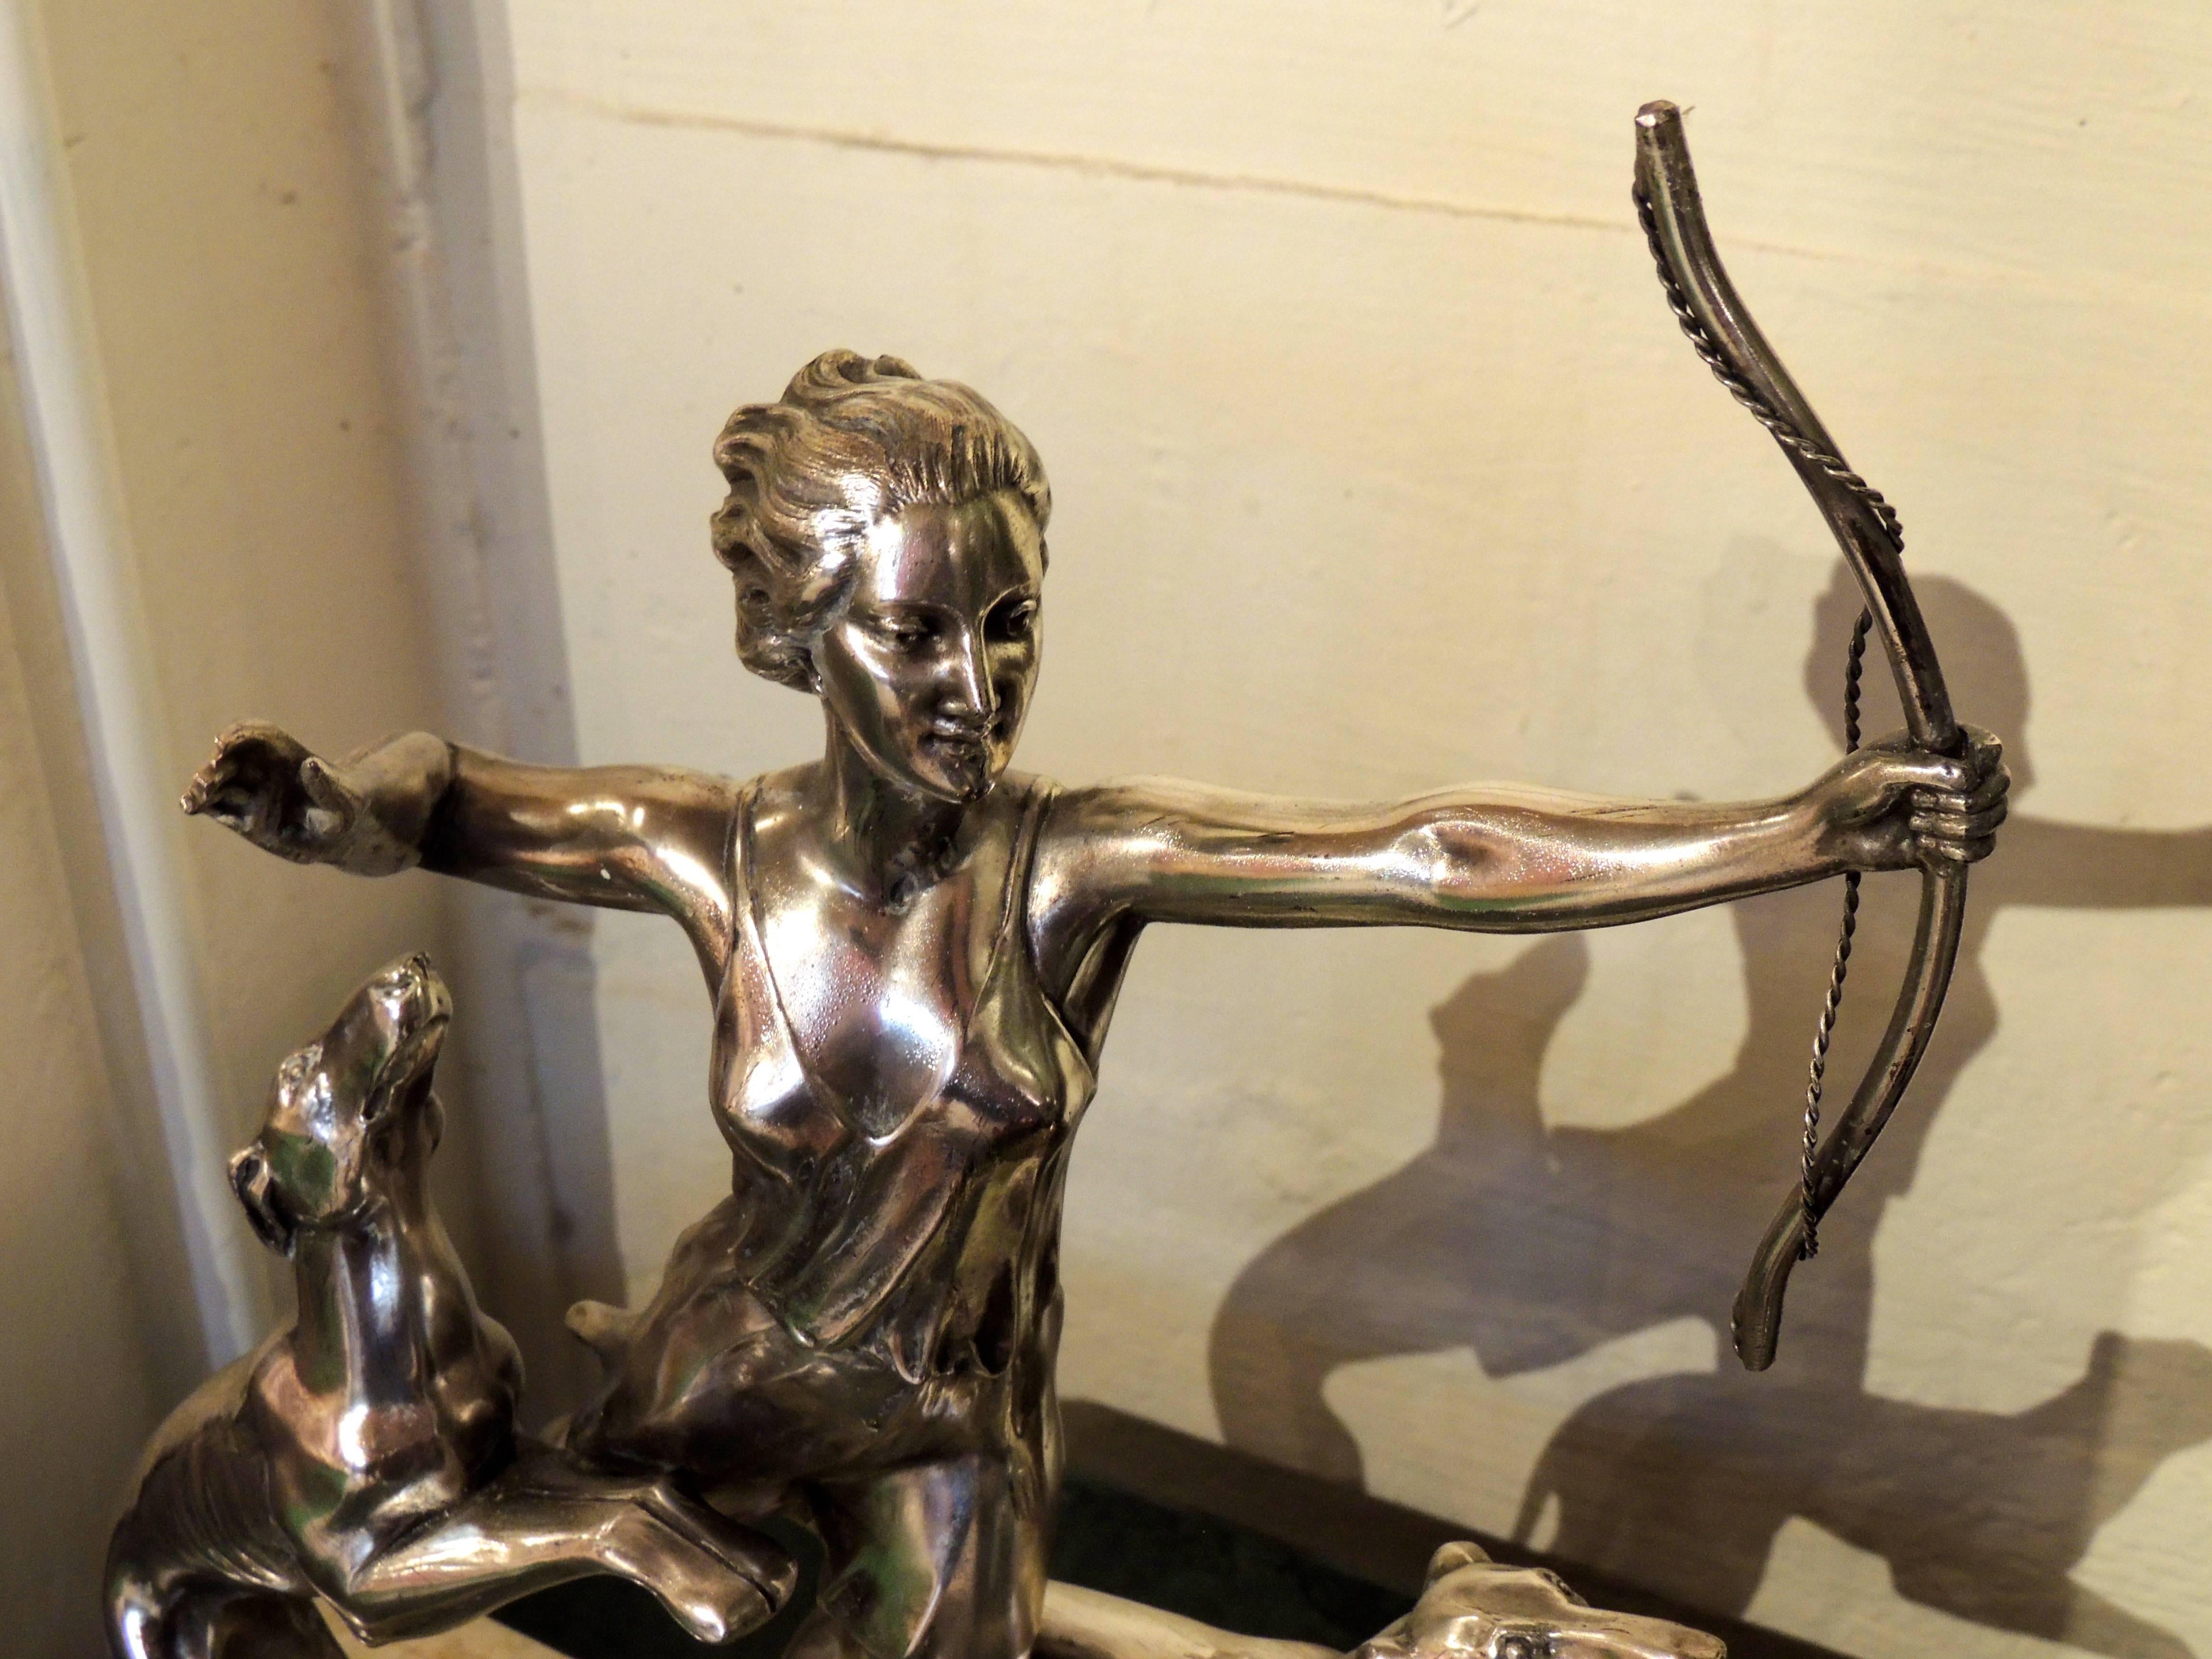 An Art Deco Icon , this image of Diana as a statue in silver on a two tone, layered marble base is one of the most graceful we have seen. The breeze gently ruffles her hair and tunic, her features and figure are well rendered. She is portrayed as a